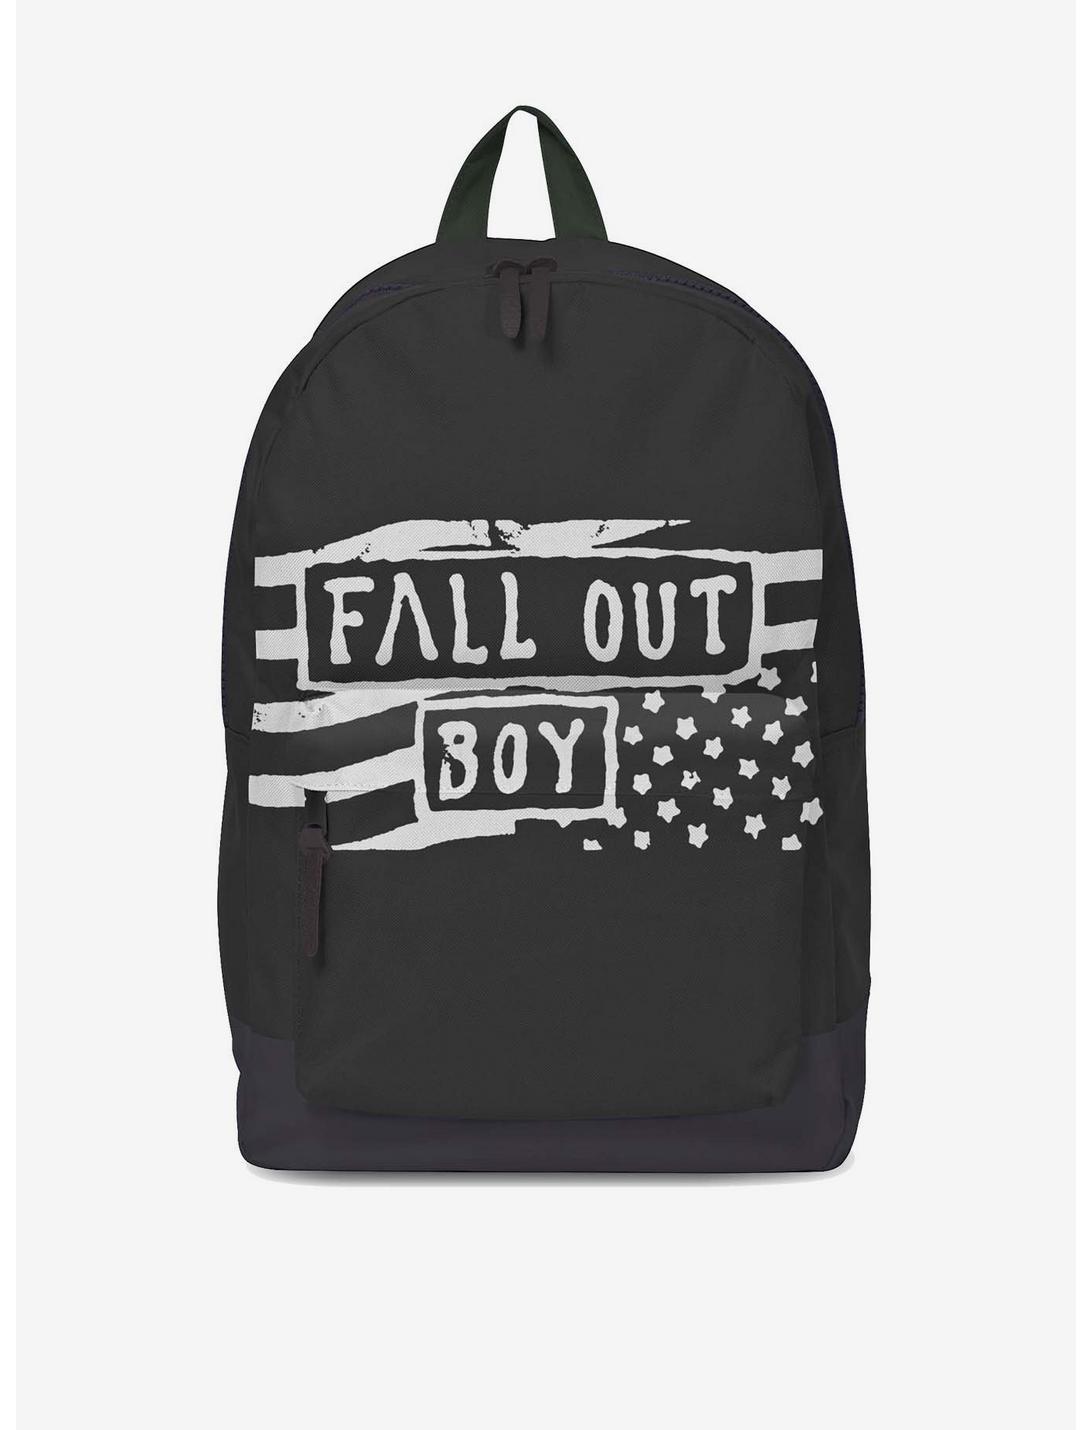 Rocksax Fall Out Boy Flag Classic Backpack, , hi-res